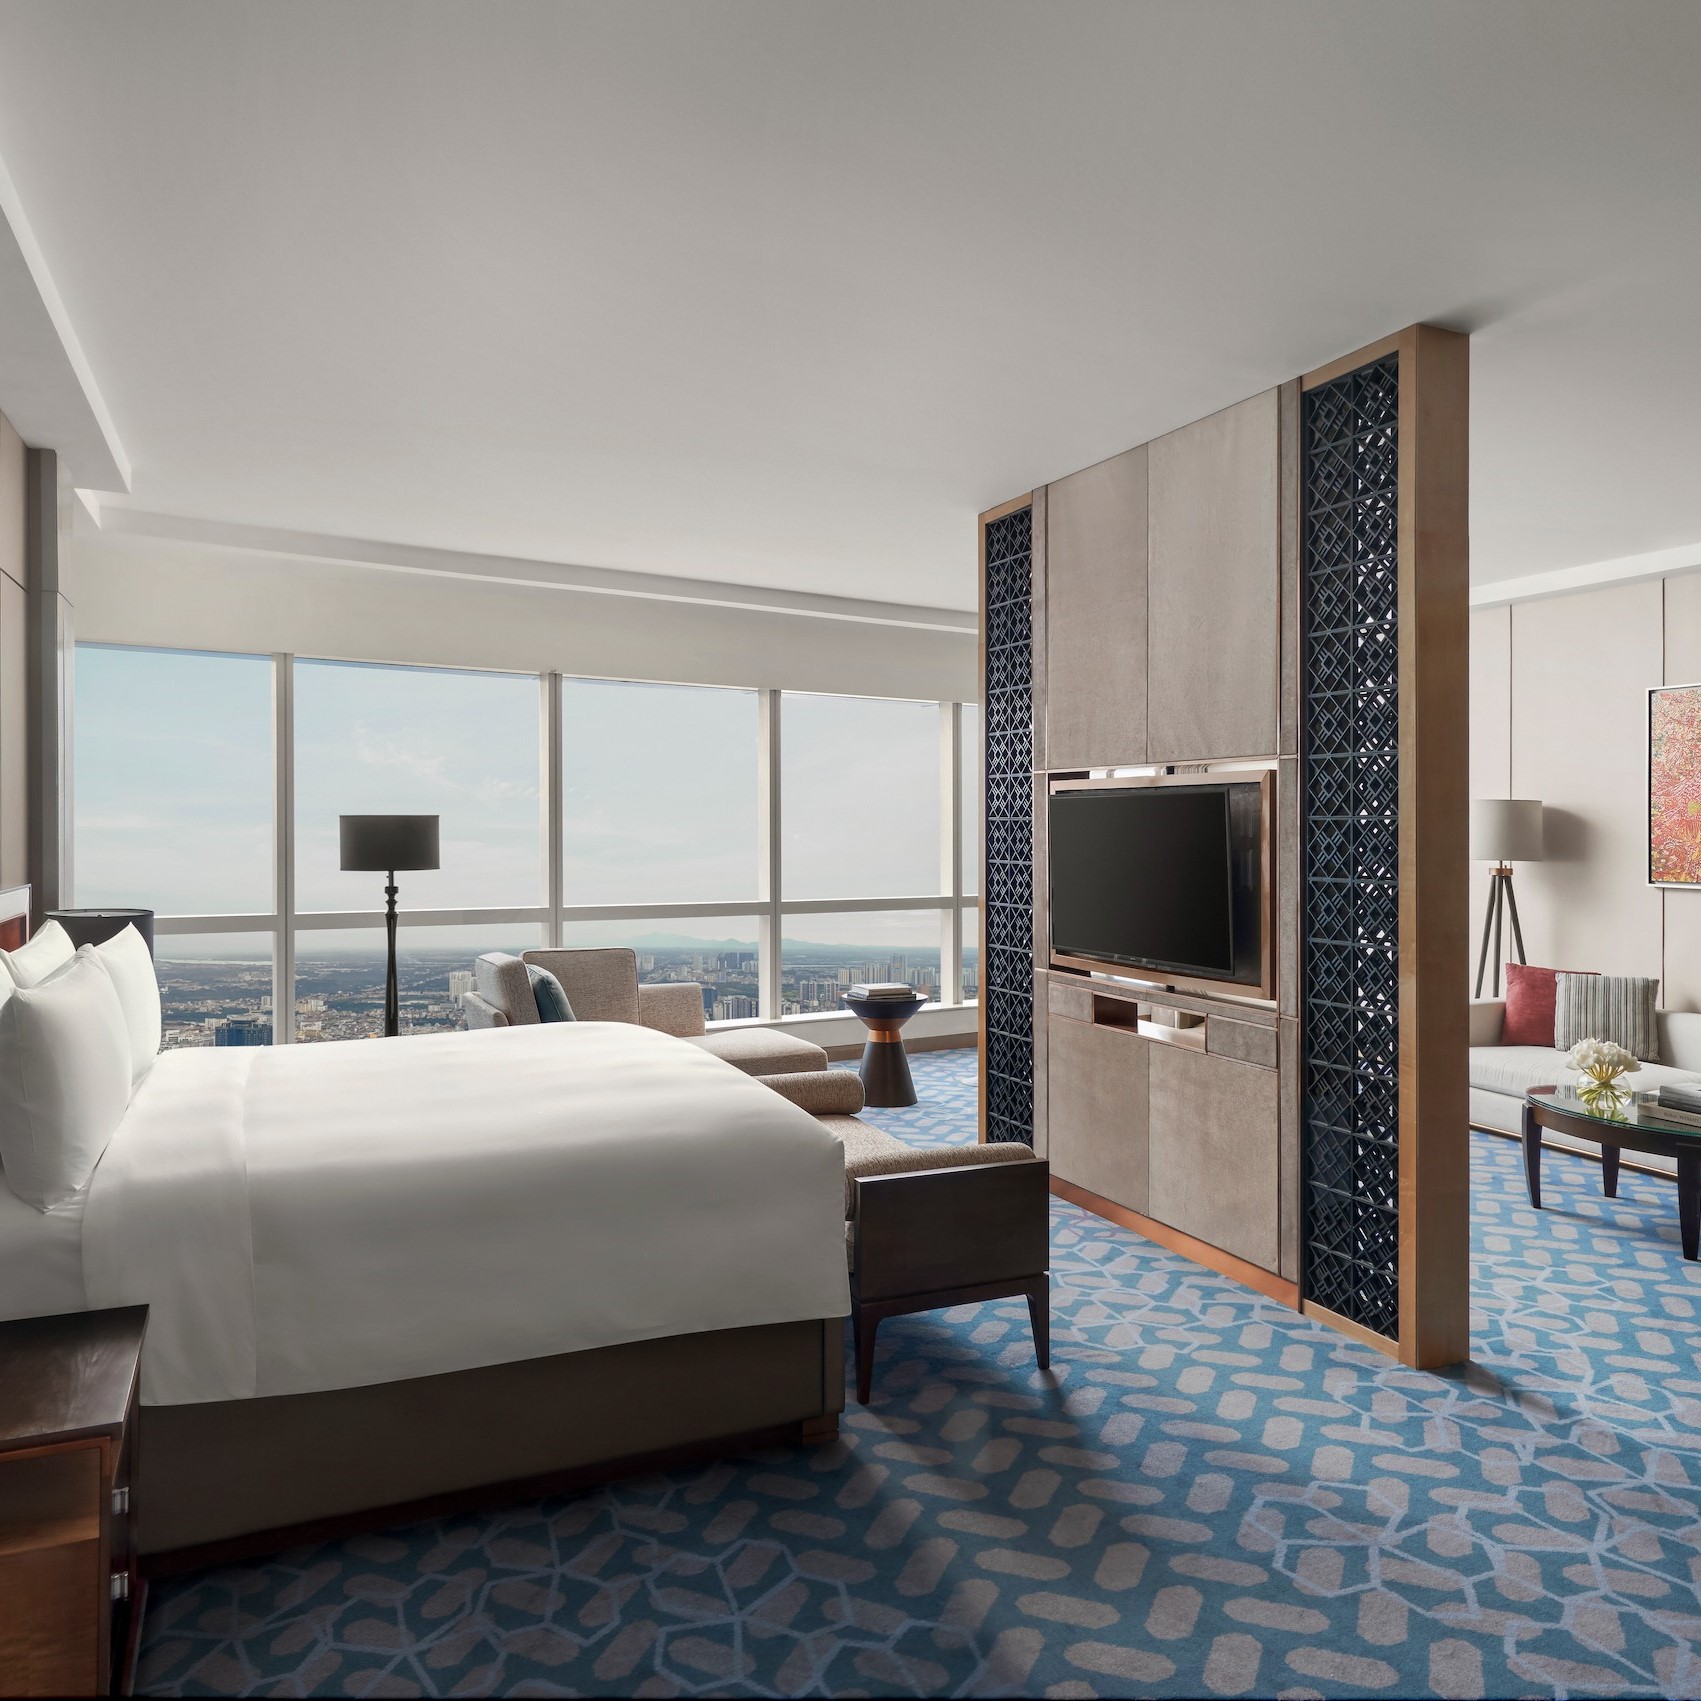 Luxurious accommodation and Club InterContinental benefits with the Presidential Suite at InterContinental Hanoi Landmark72